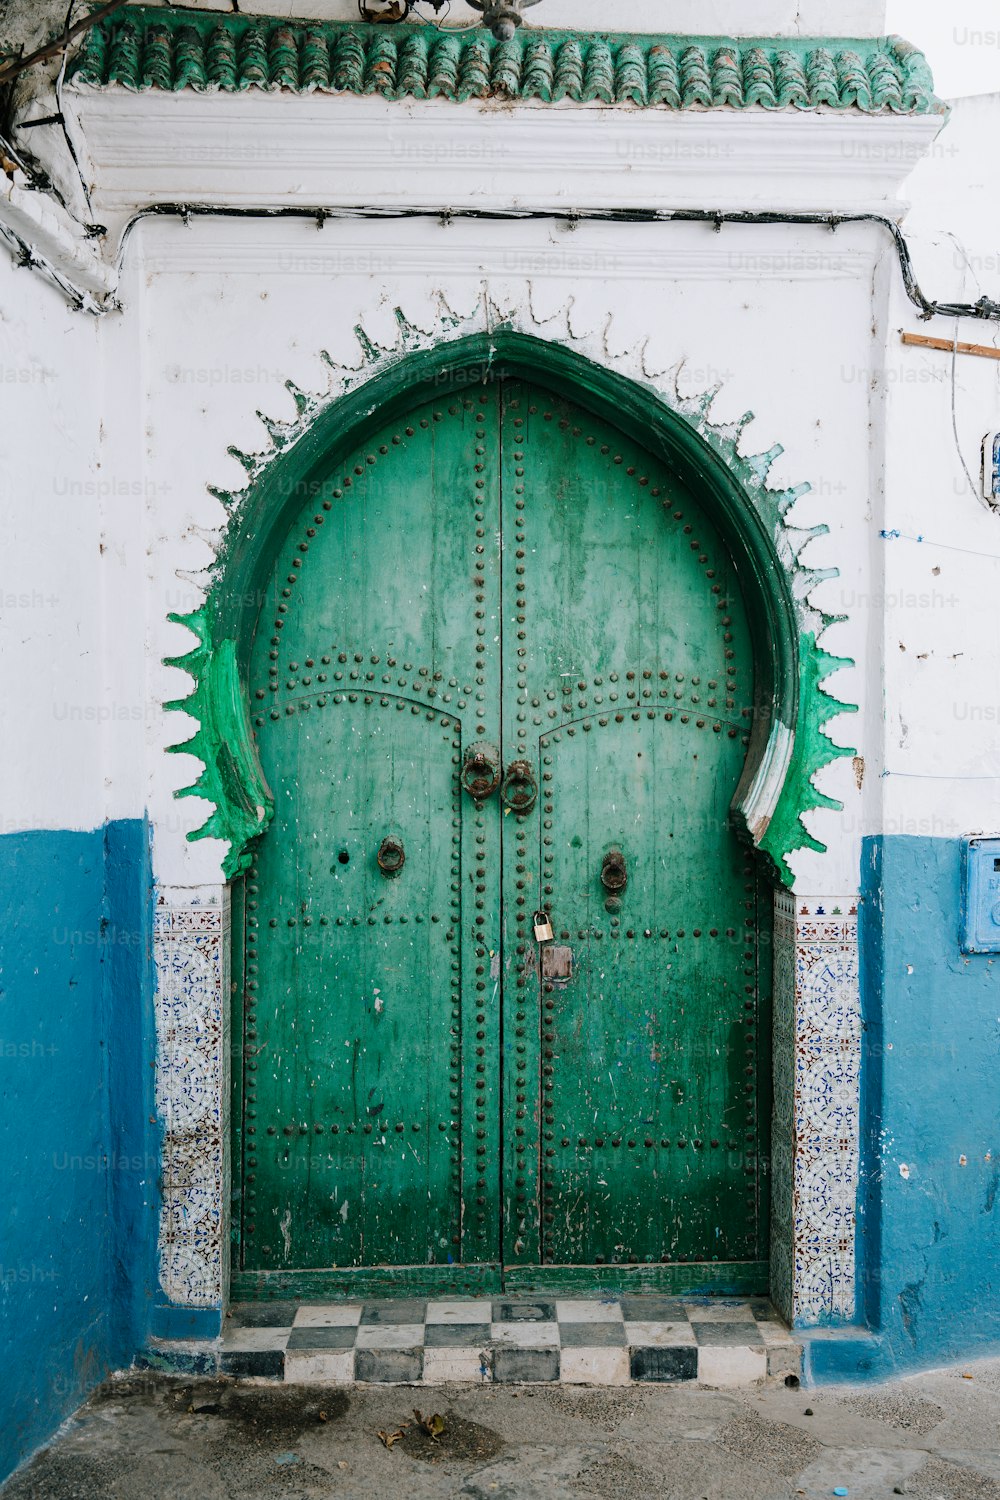 a large green door with spikes on it